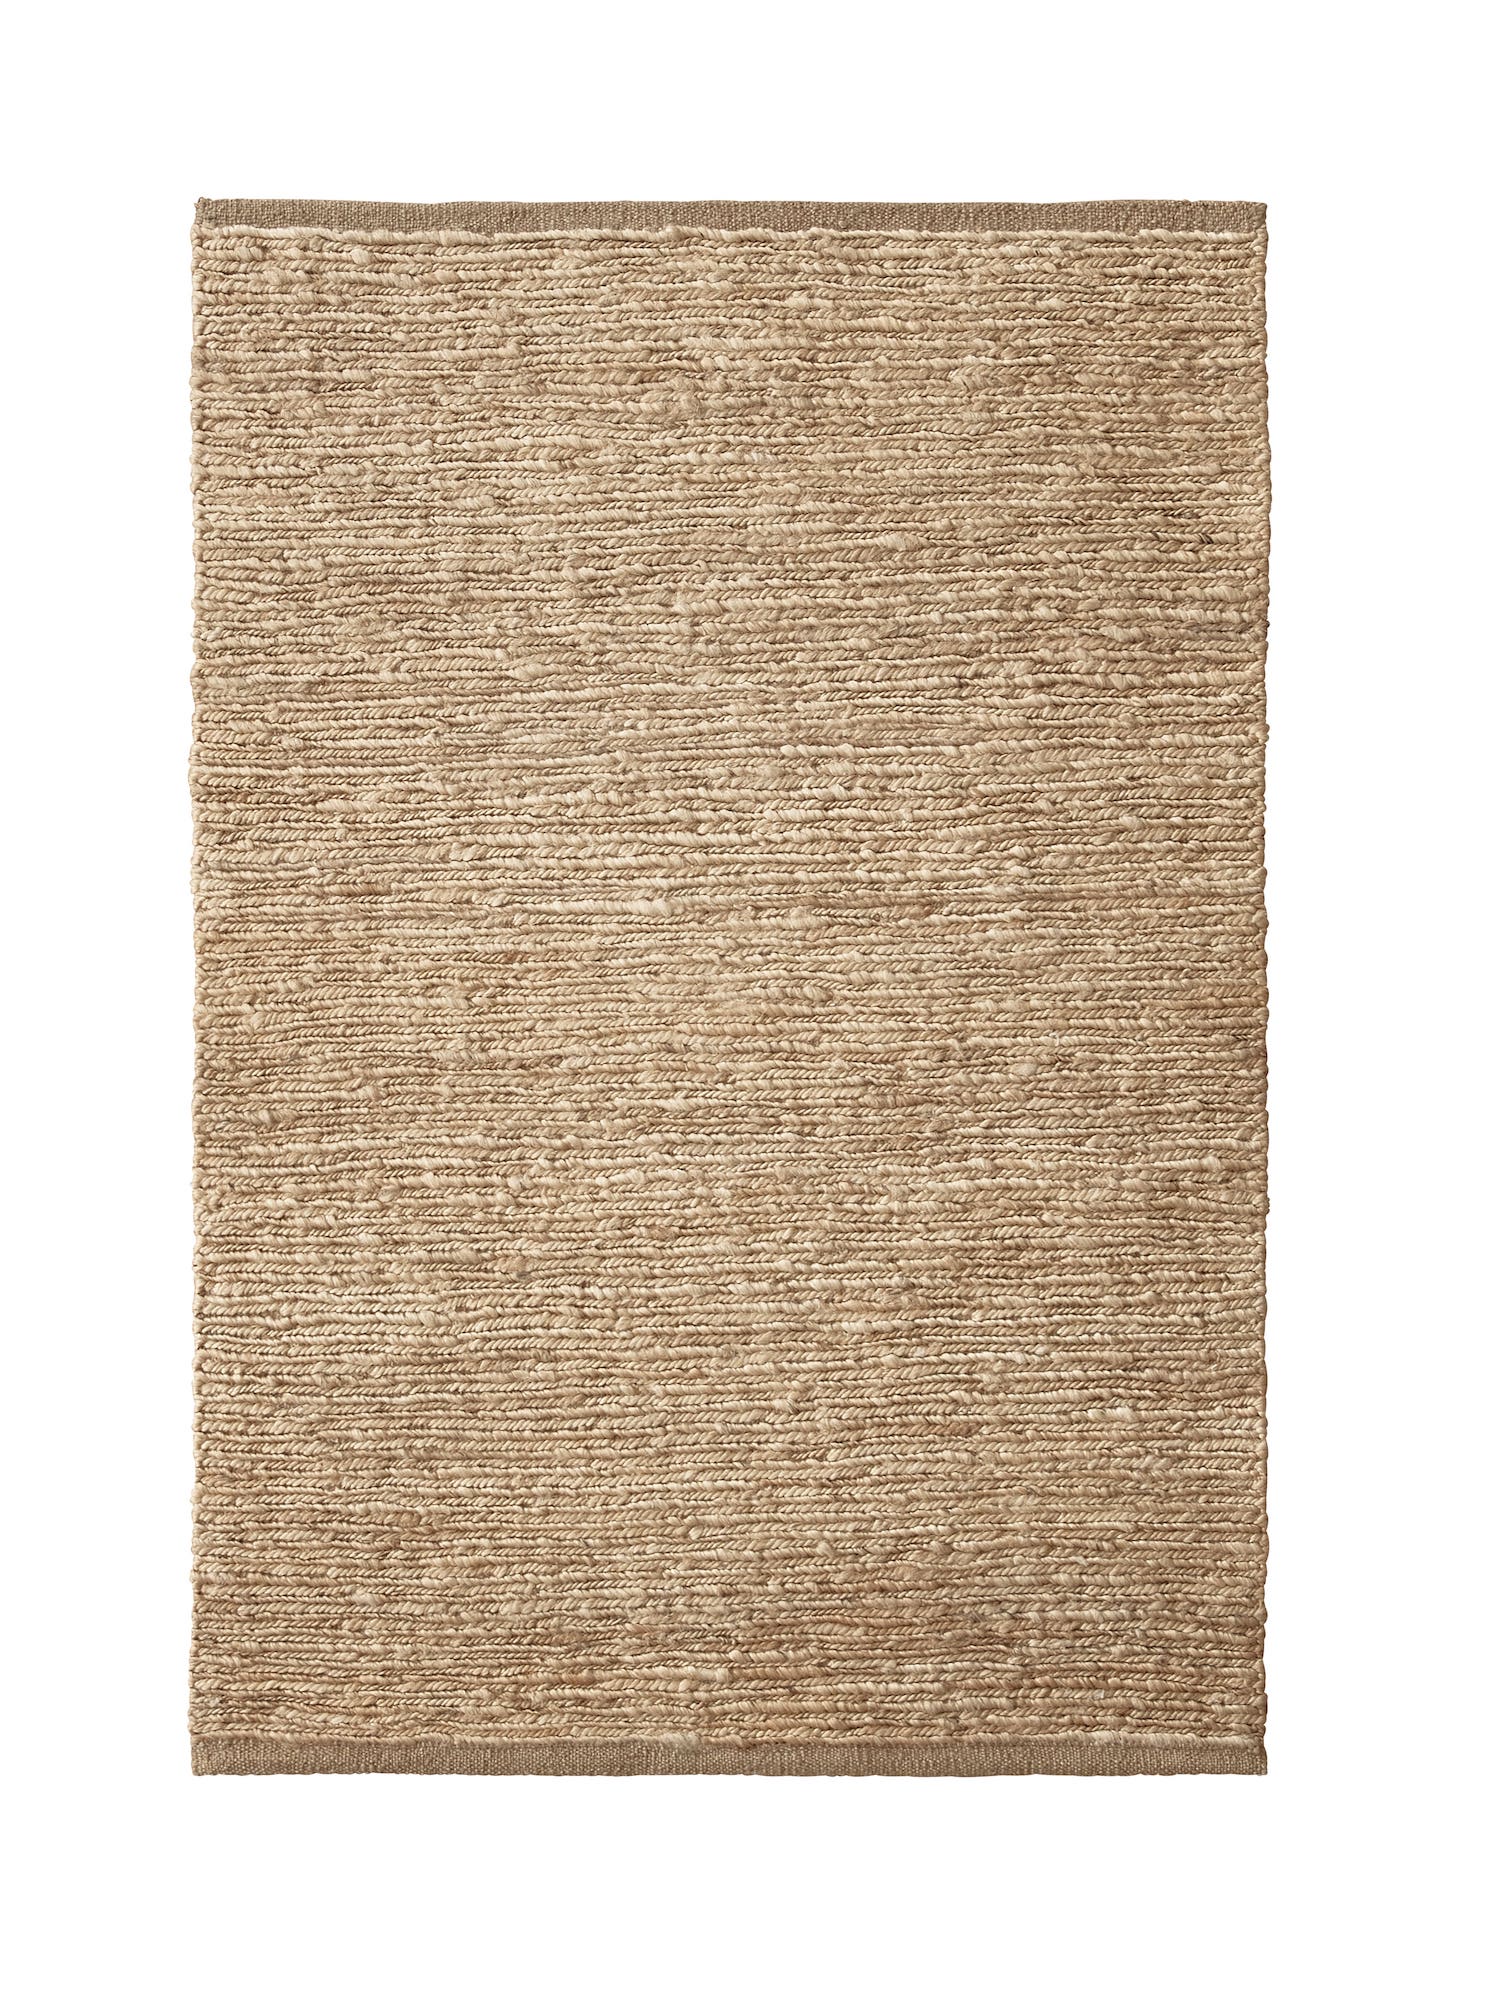 River Natural Rug. An organic area rug for small spaces echoes the ripples and eddies of its namesake for a timeless aesthetic.